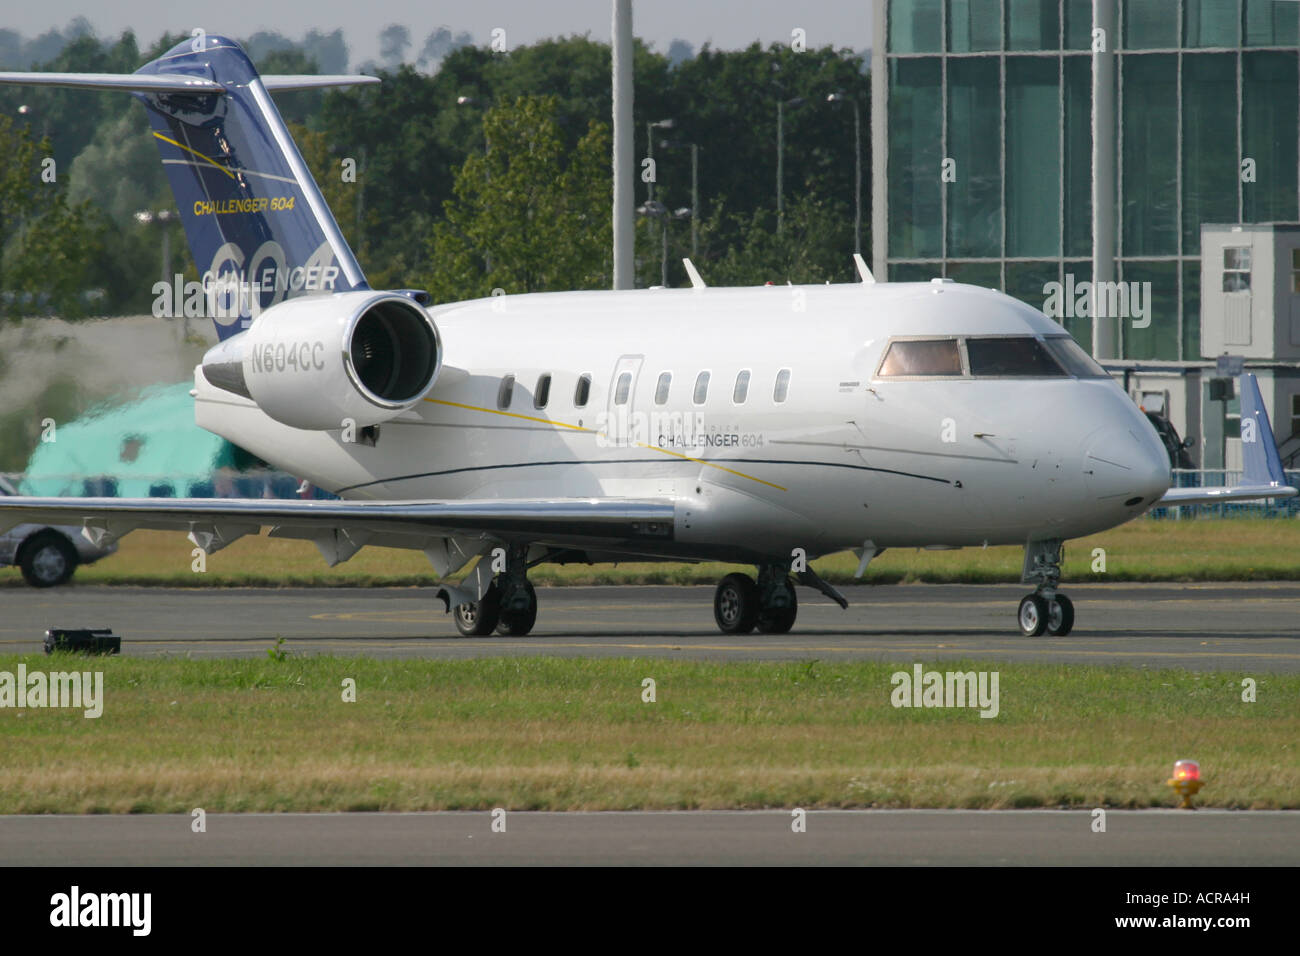 Business Jet Bombardier Aerospace Corp. Canadair CL-600-2B16 Challenger 604 Foto Stock